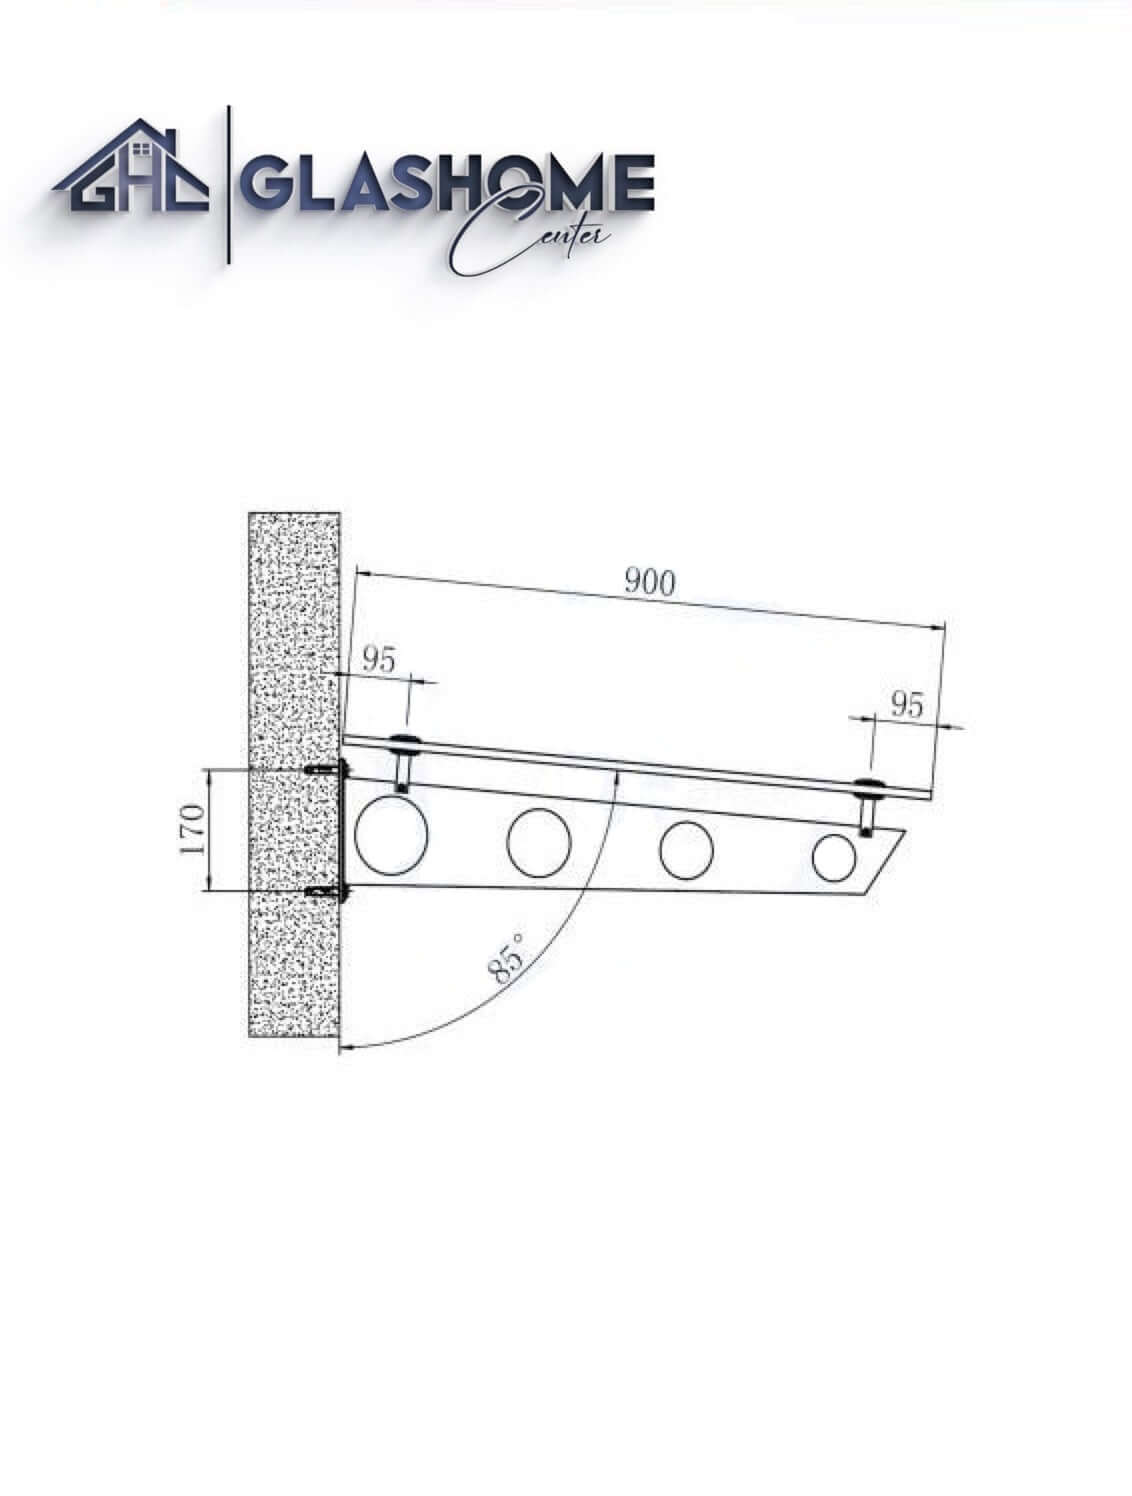 GlasHomeCenter - glass canopy - gray glass - 250x90cm - 13.1mm laminated safety glass - incl. 3 stainless steel brackets variant "Stockholm"